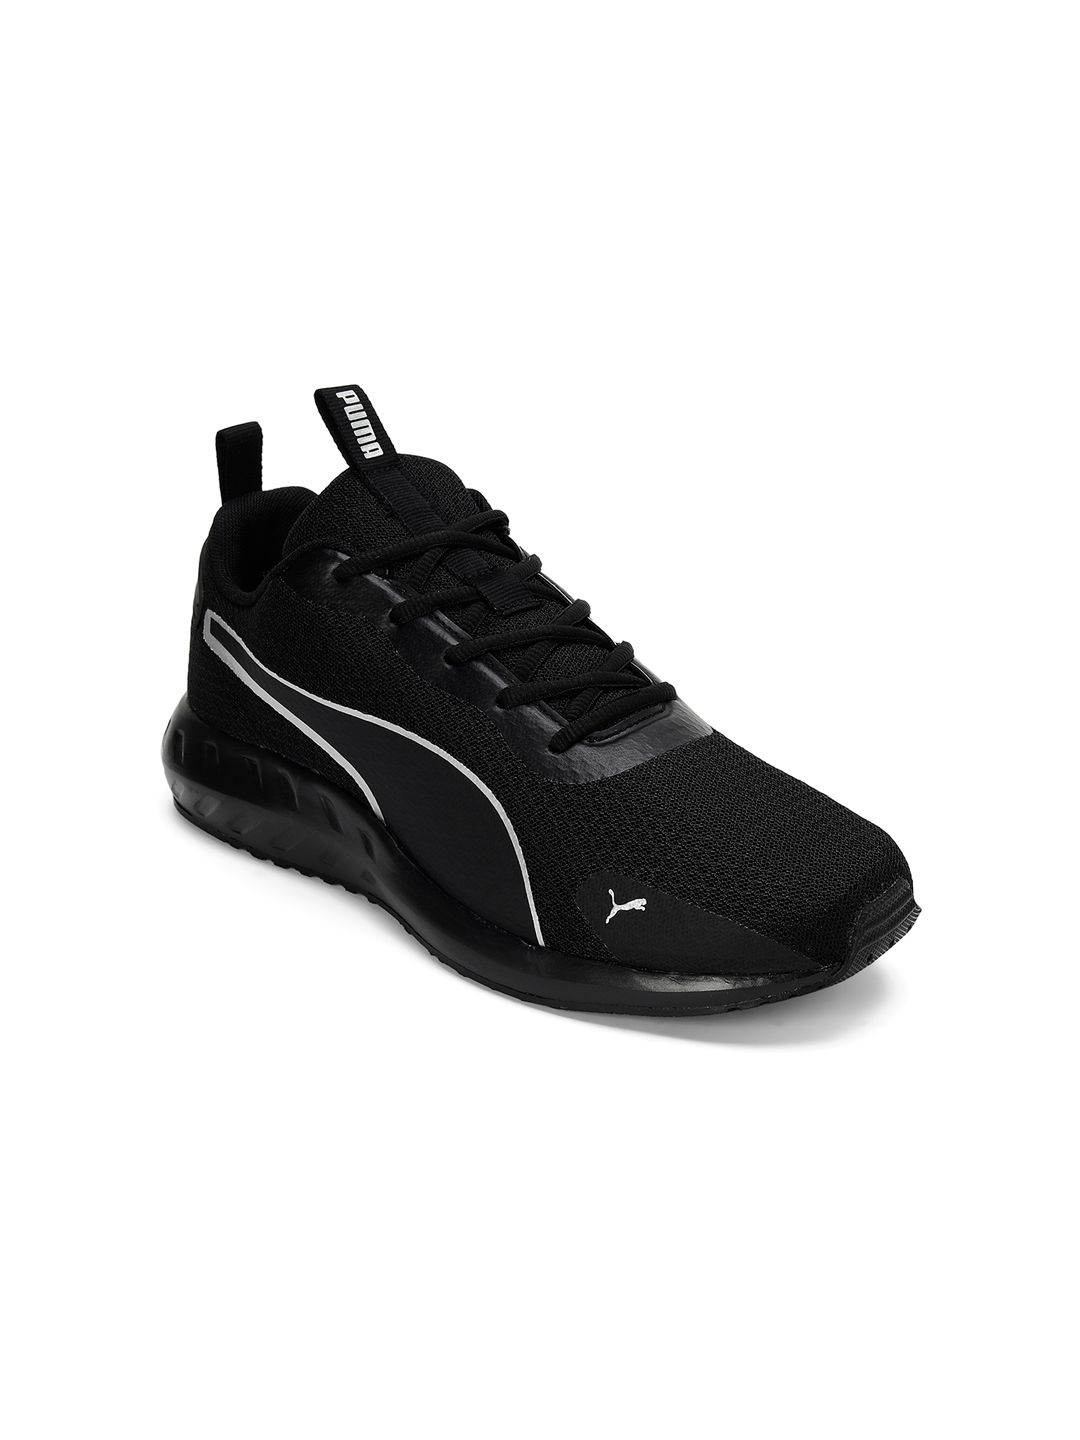 Buy Men Black and Silver Puma Walter Sports Shoes From Fancode Shop.